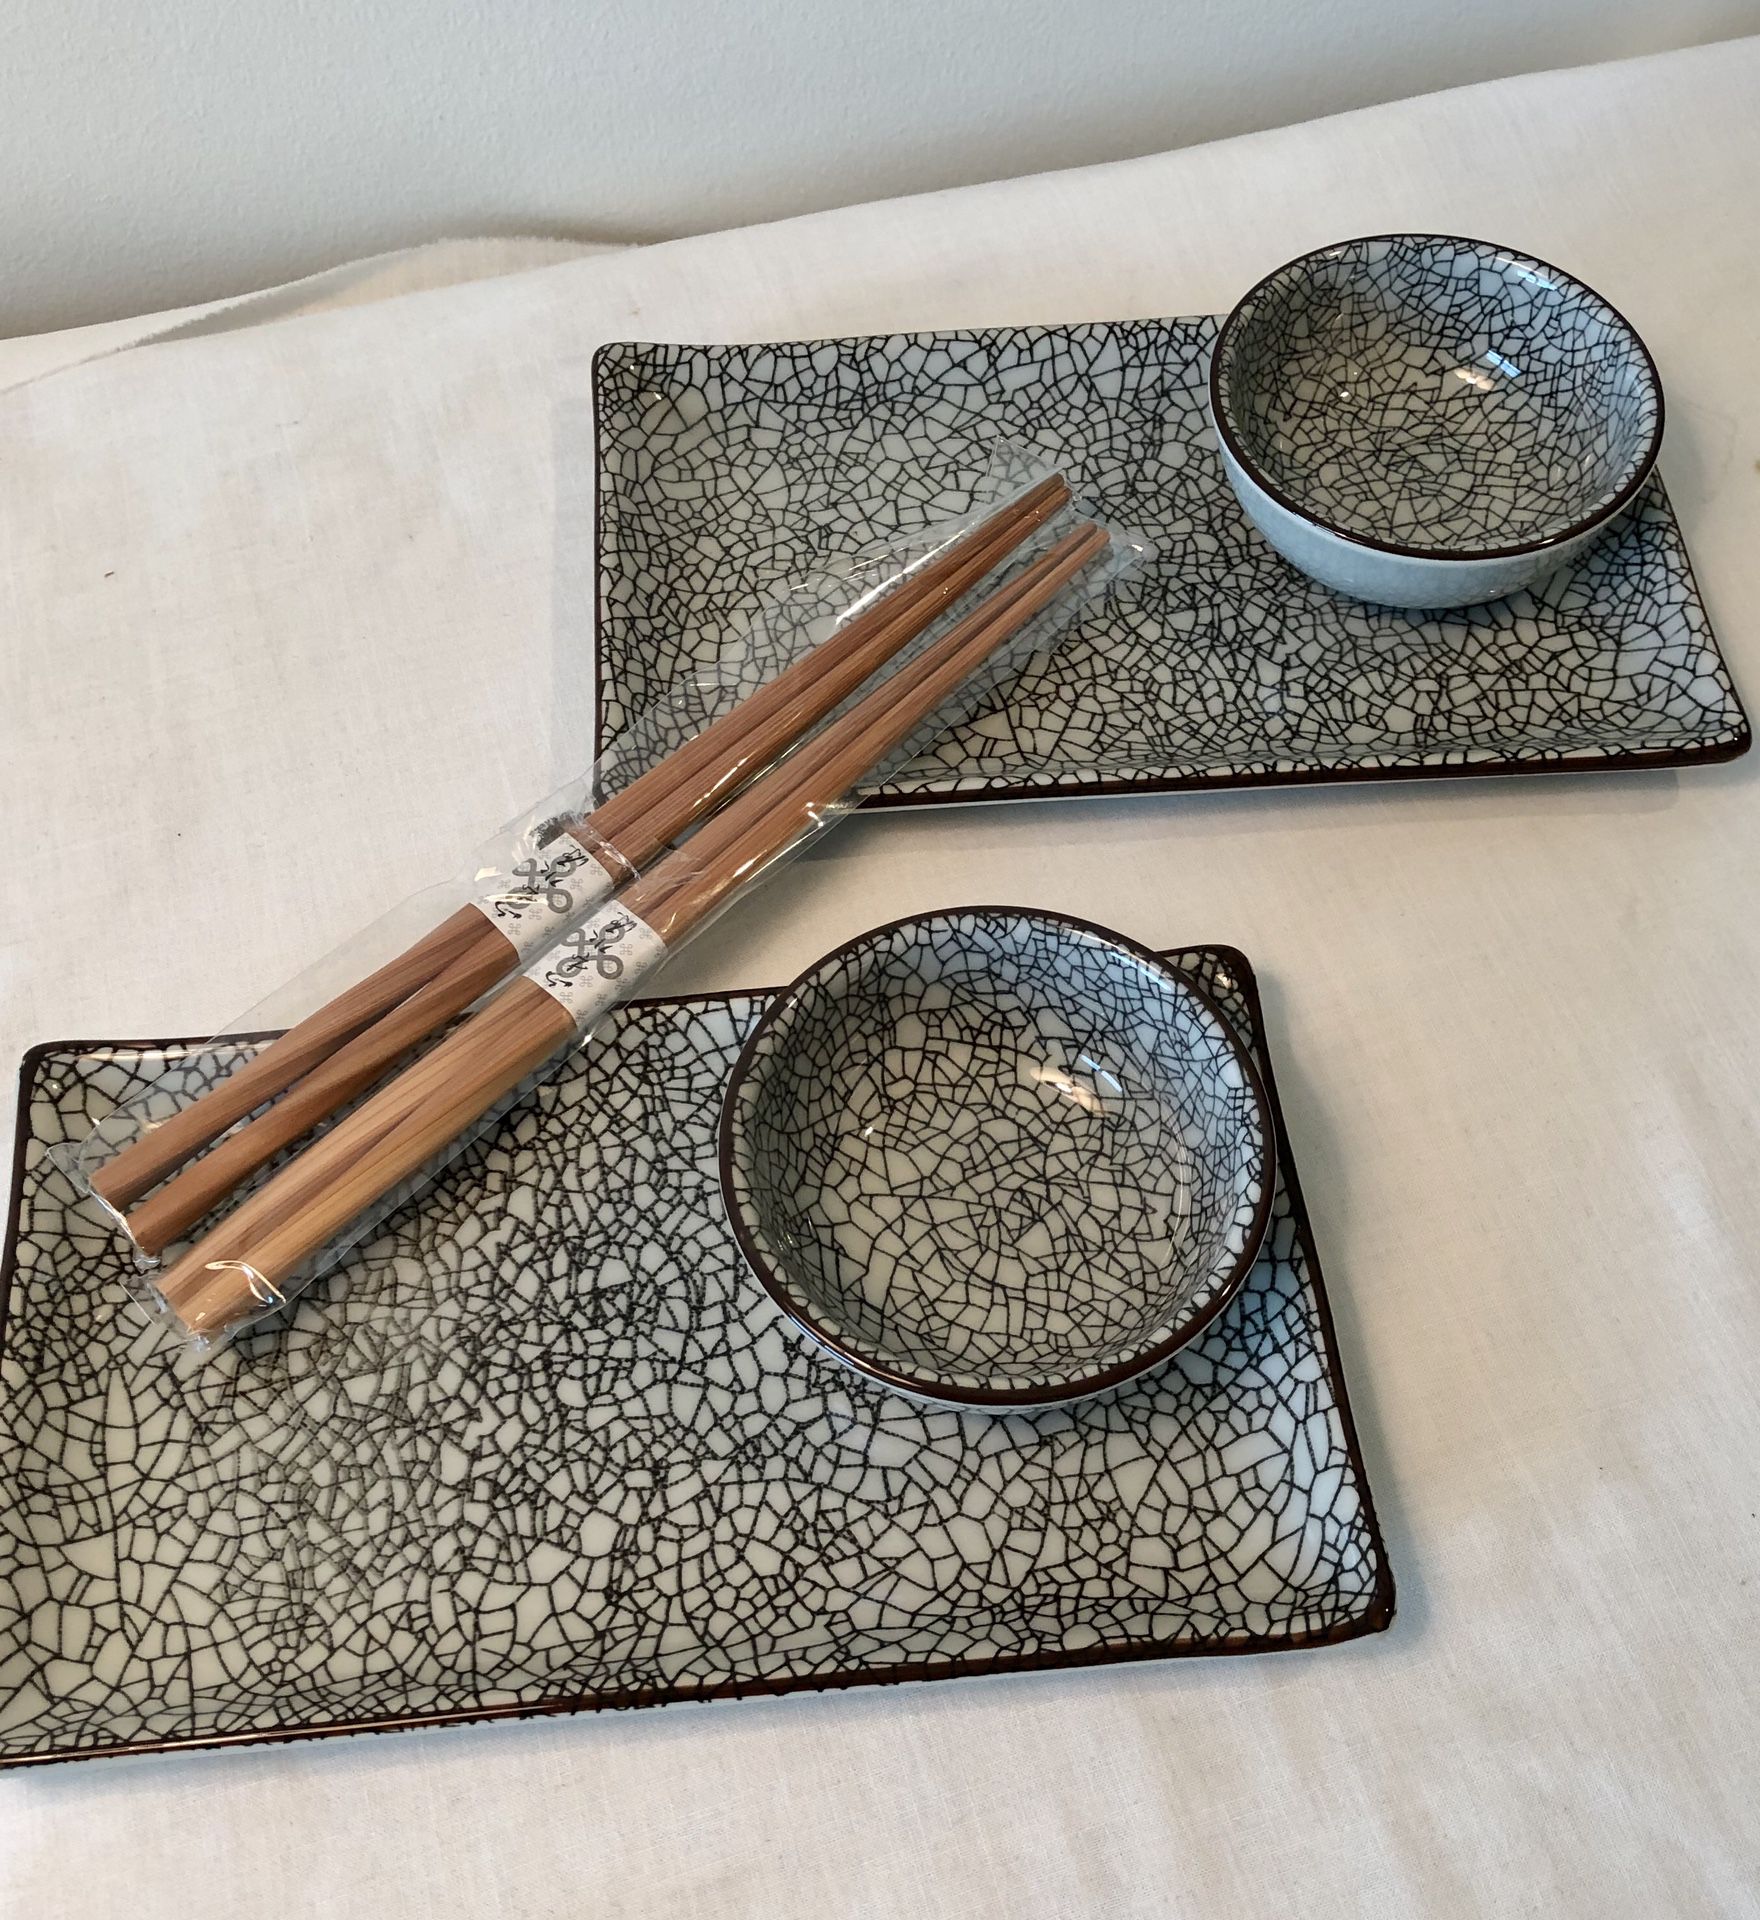 New Sushi place setting for two